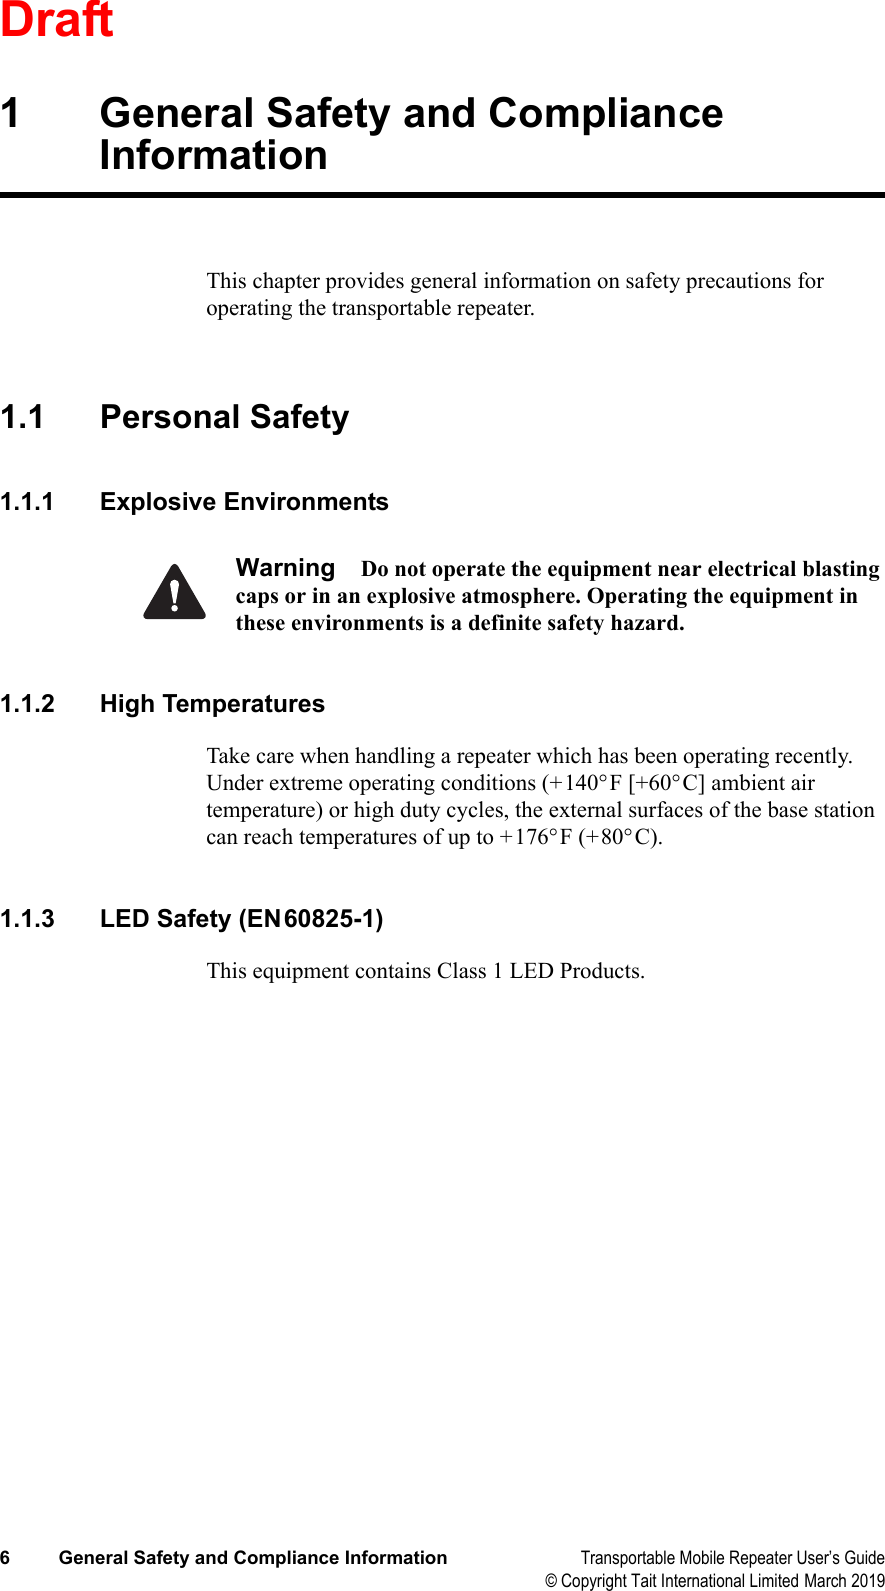 Draft6 General Safety and Compliance Information Transportable Mobile Repeater User’s Guide© Copyright Tait International Limited March 20191 General Safety and Compliance InformationThis chapter provides general information on safety precautions for operating the transportable repeater.1.1 Personal Safety1.1.1 Explosive EnvironmentsWarning Do not operate the equipment near electrical blasting caps or in an explosive atmosphere. Operating the equipment in these environments is a definite safety hazard.1.1.2 High TemperaturesTake care when handling a repeater which has been operating recently. Under extreme operating conditions (+140°F [+60°C] ambient air temperature) or high duty cycles, the external surfaces of the base station can reach temperatures of up to +176°F (+80°C).1.1.3 LED Safety (EN60825-1)This equipment contains Class 1 LED Products.